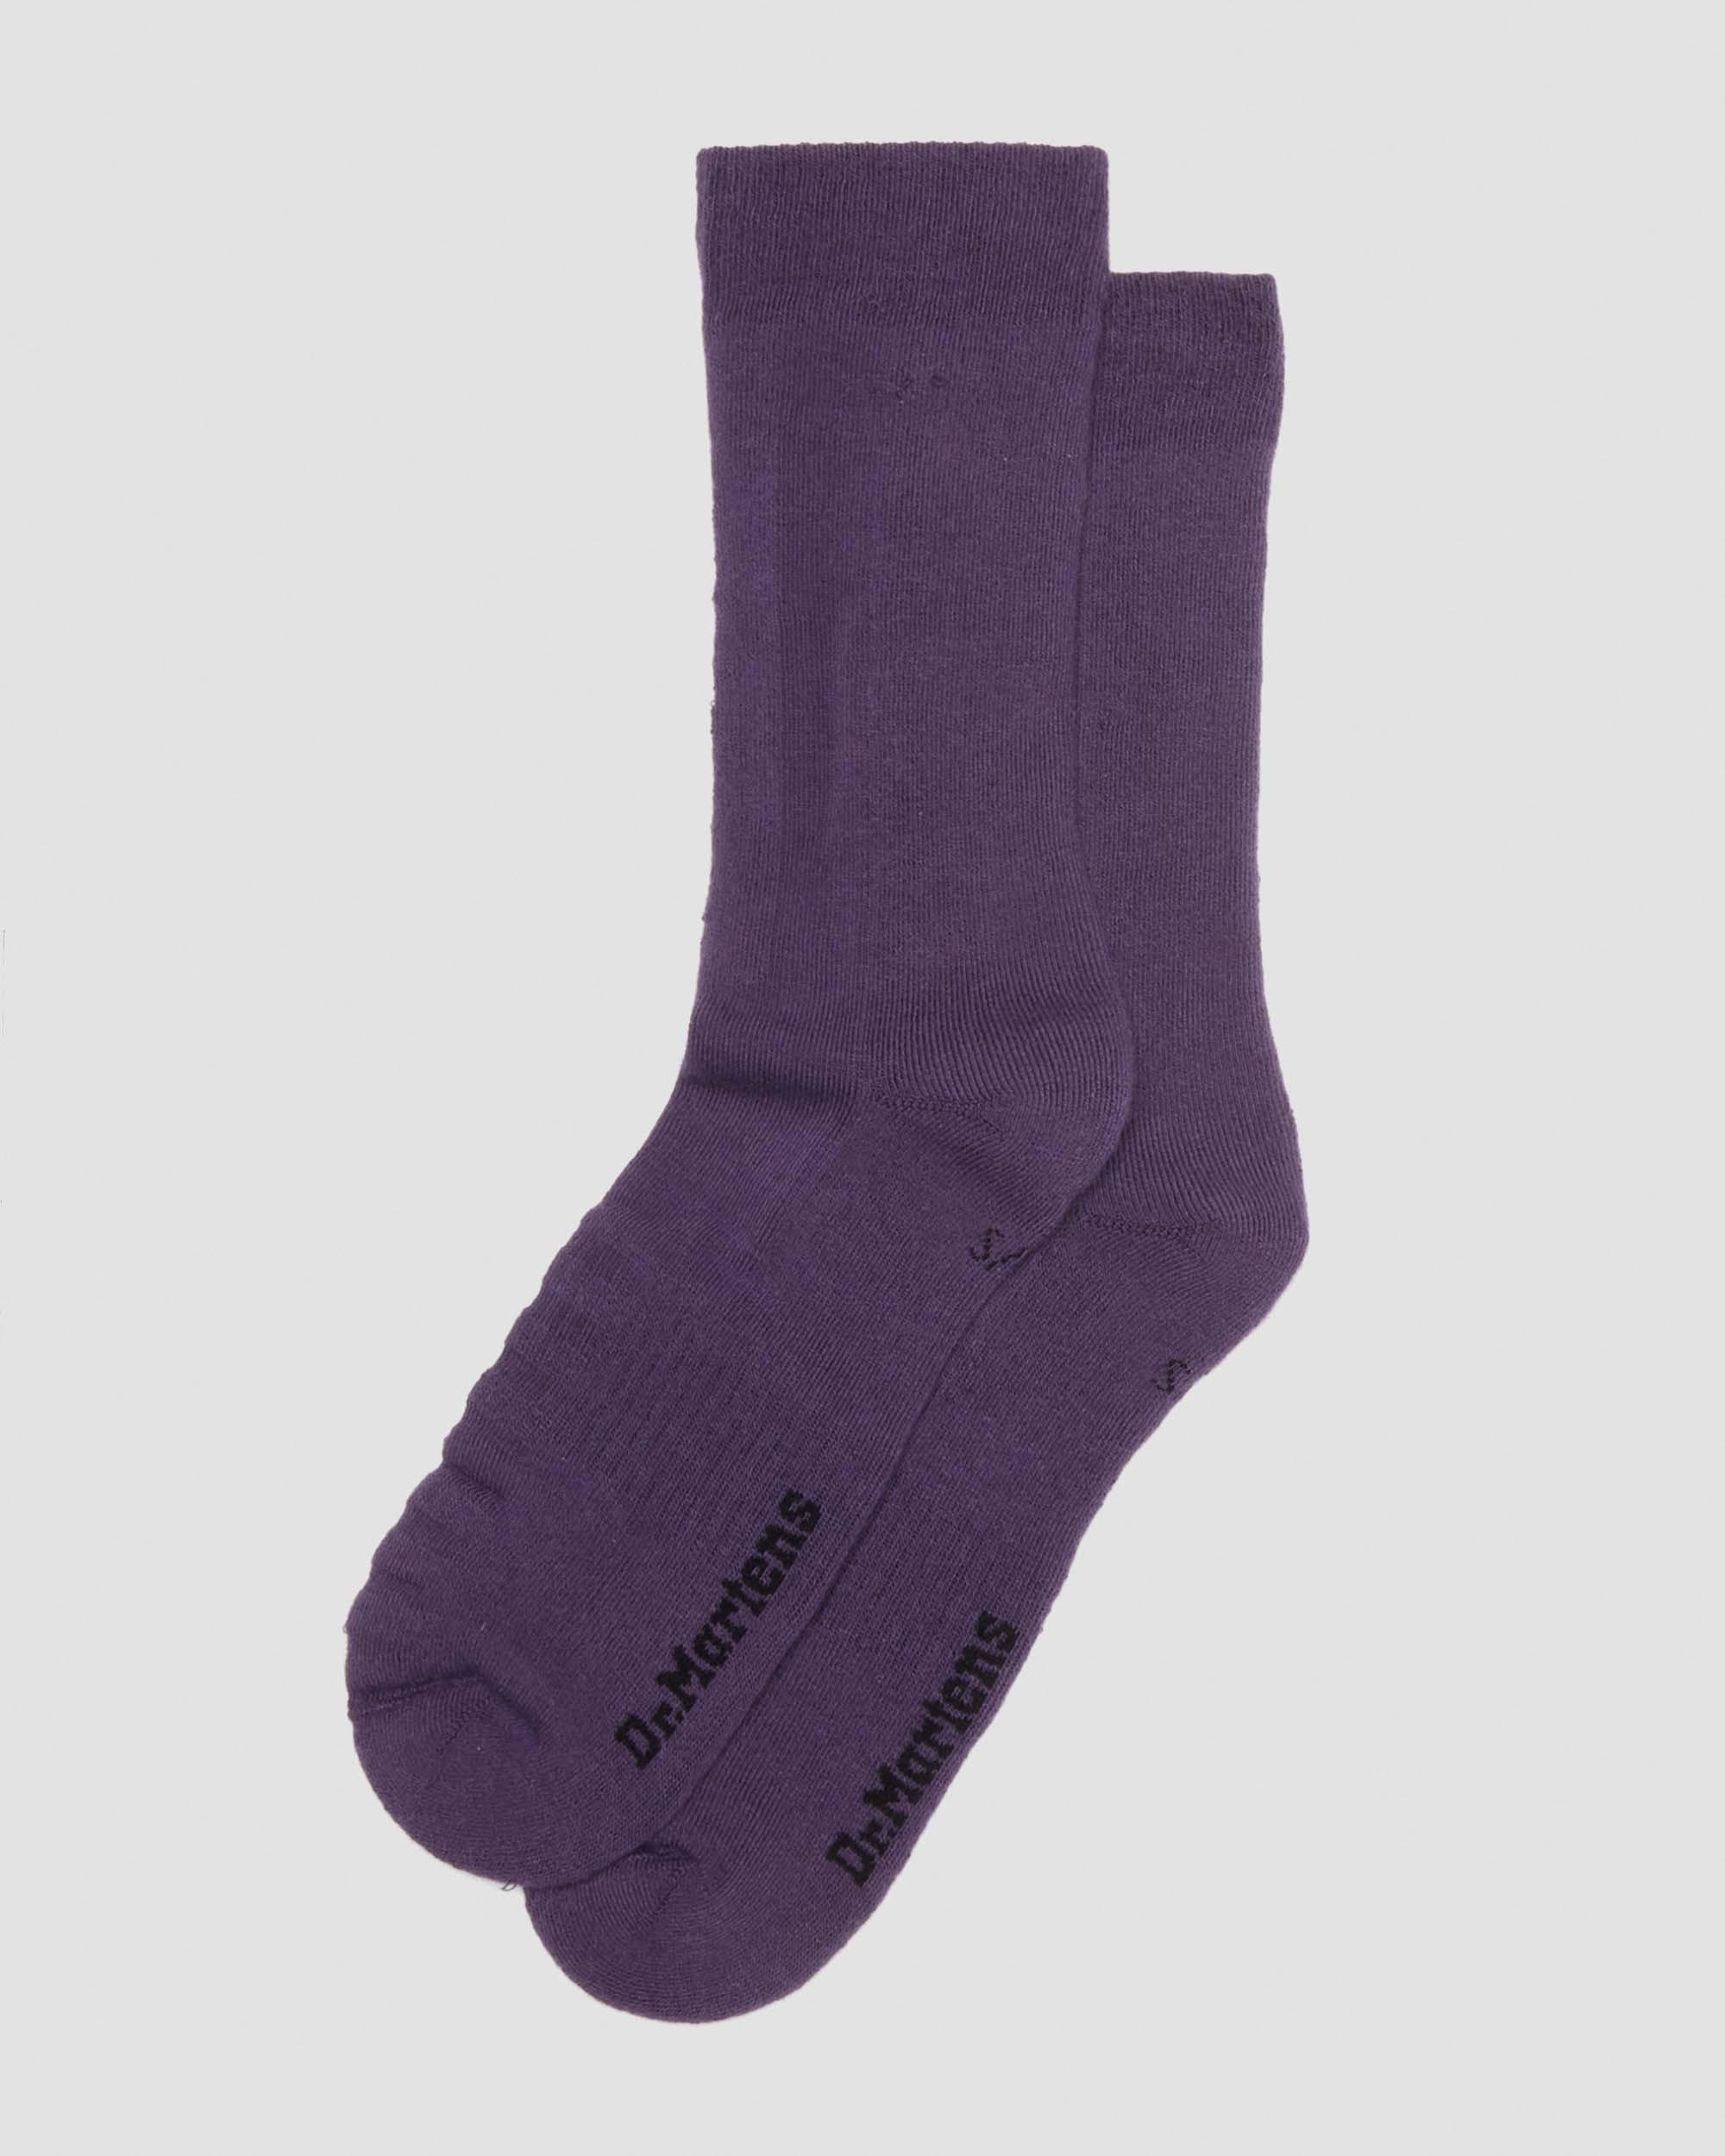 Double Doc Cotton Blend Socks in Muted Purple